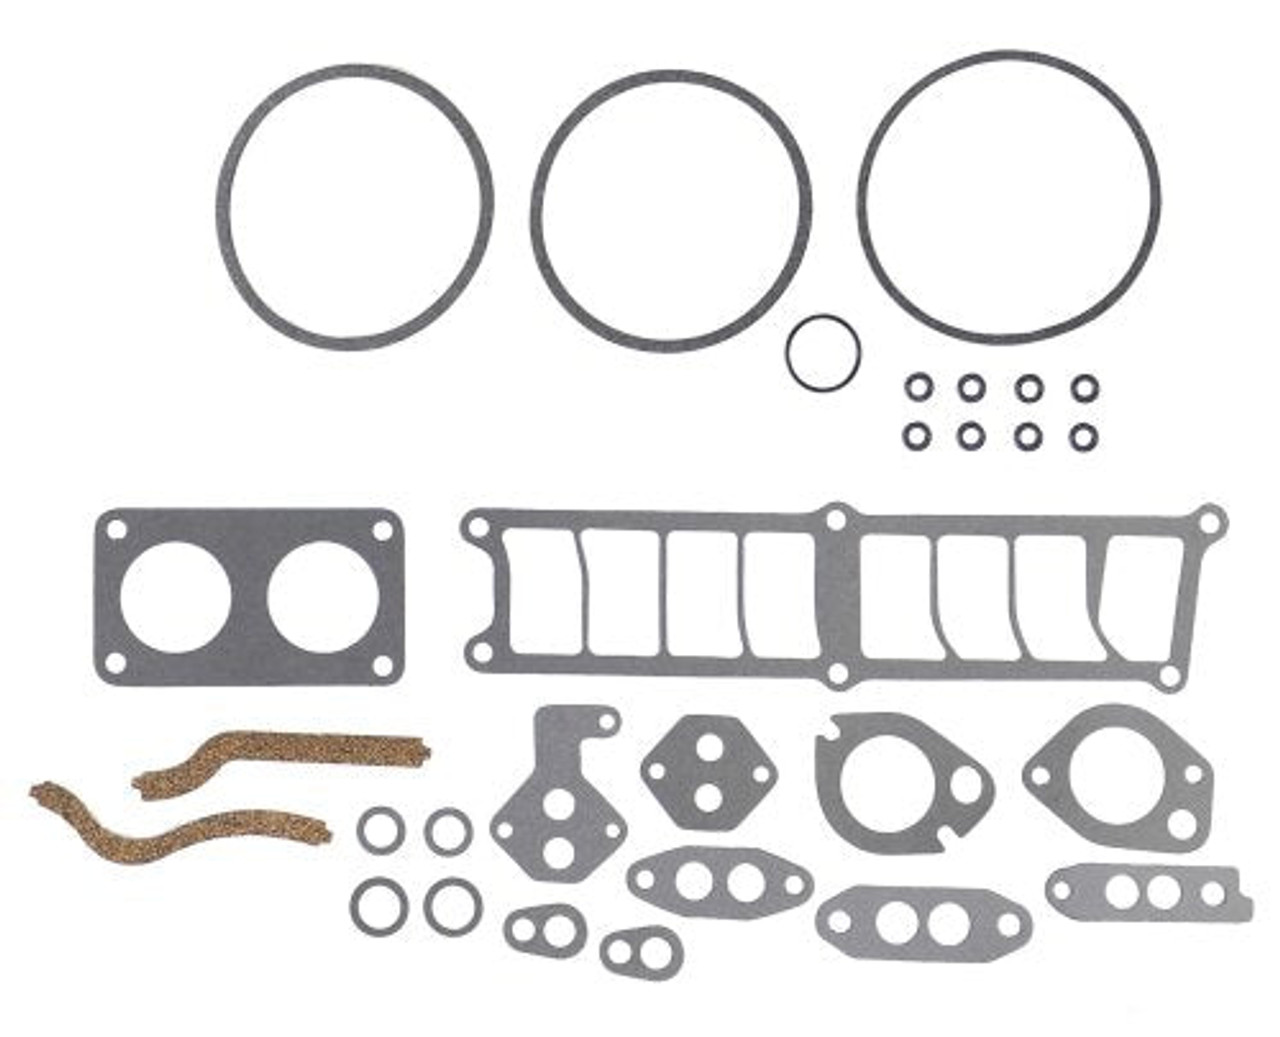 Head Gasket Set - 1985 Ford Mustang 5.0L Engine Parts # HGS4112ZE20